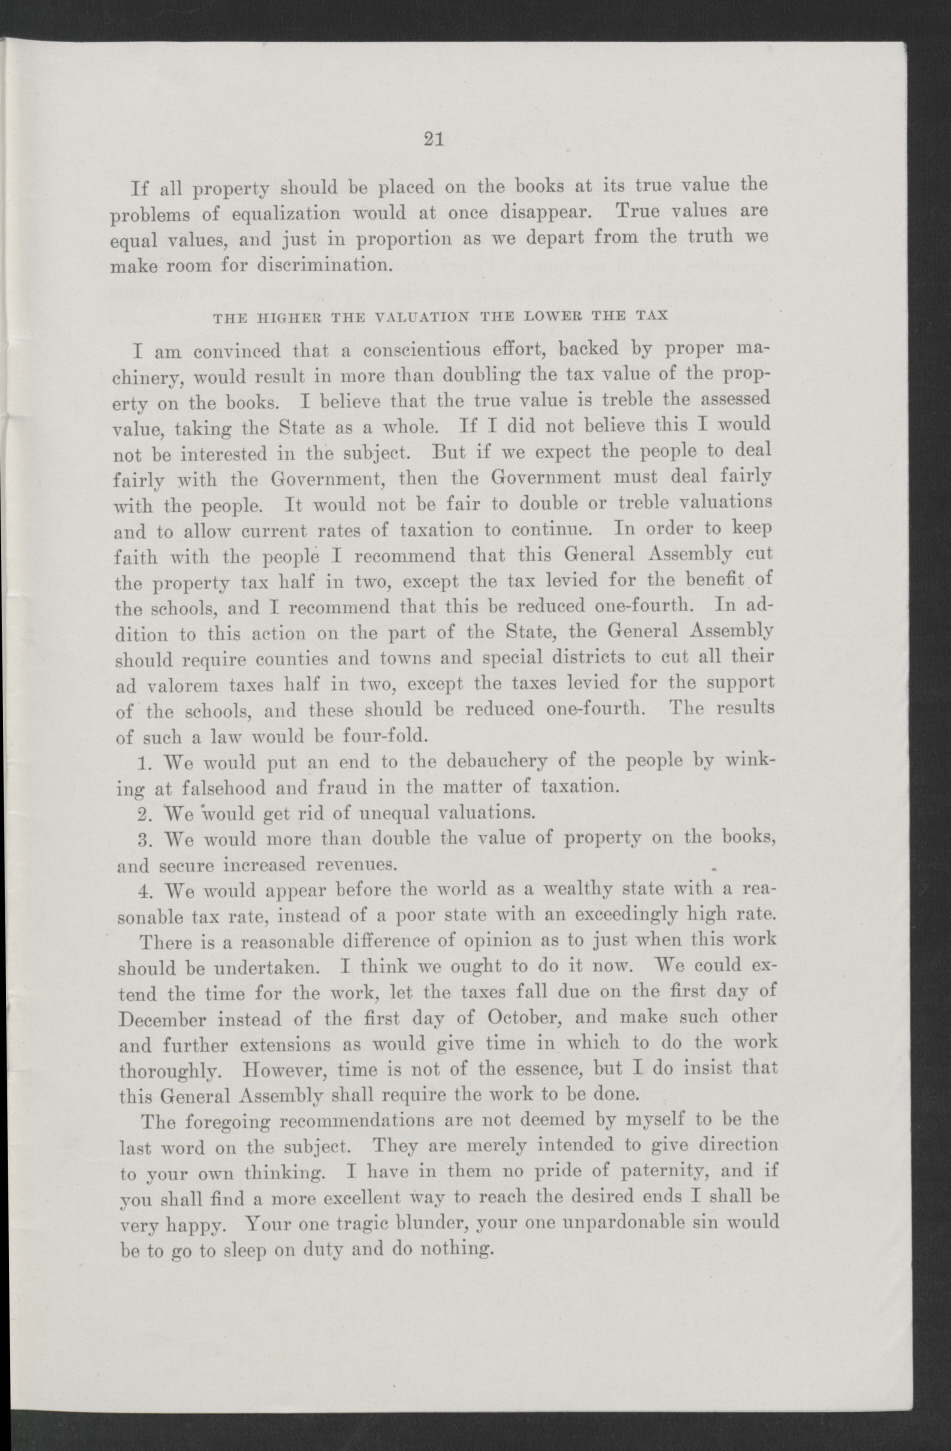 Biennial Message of Governor Thomas W. Bickett to the General Assembly, January 9, 1919, page 19